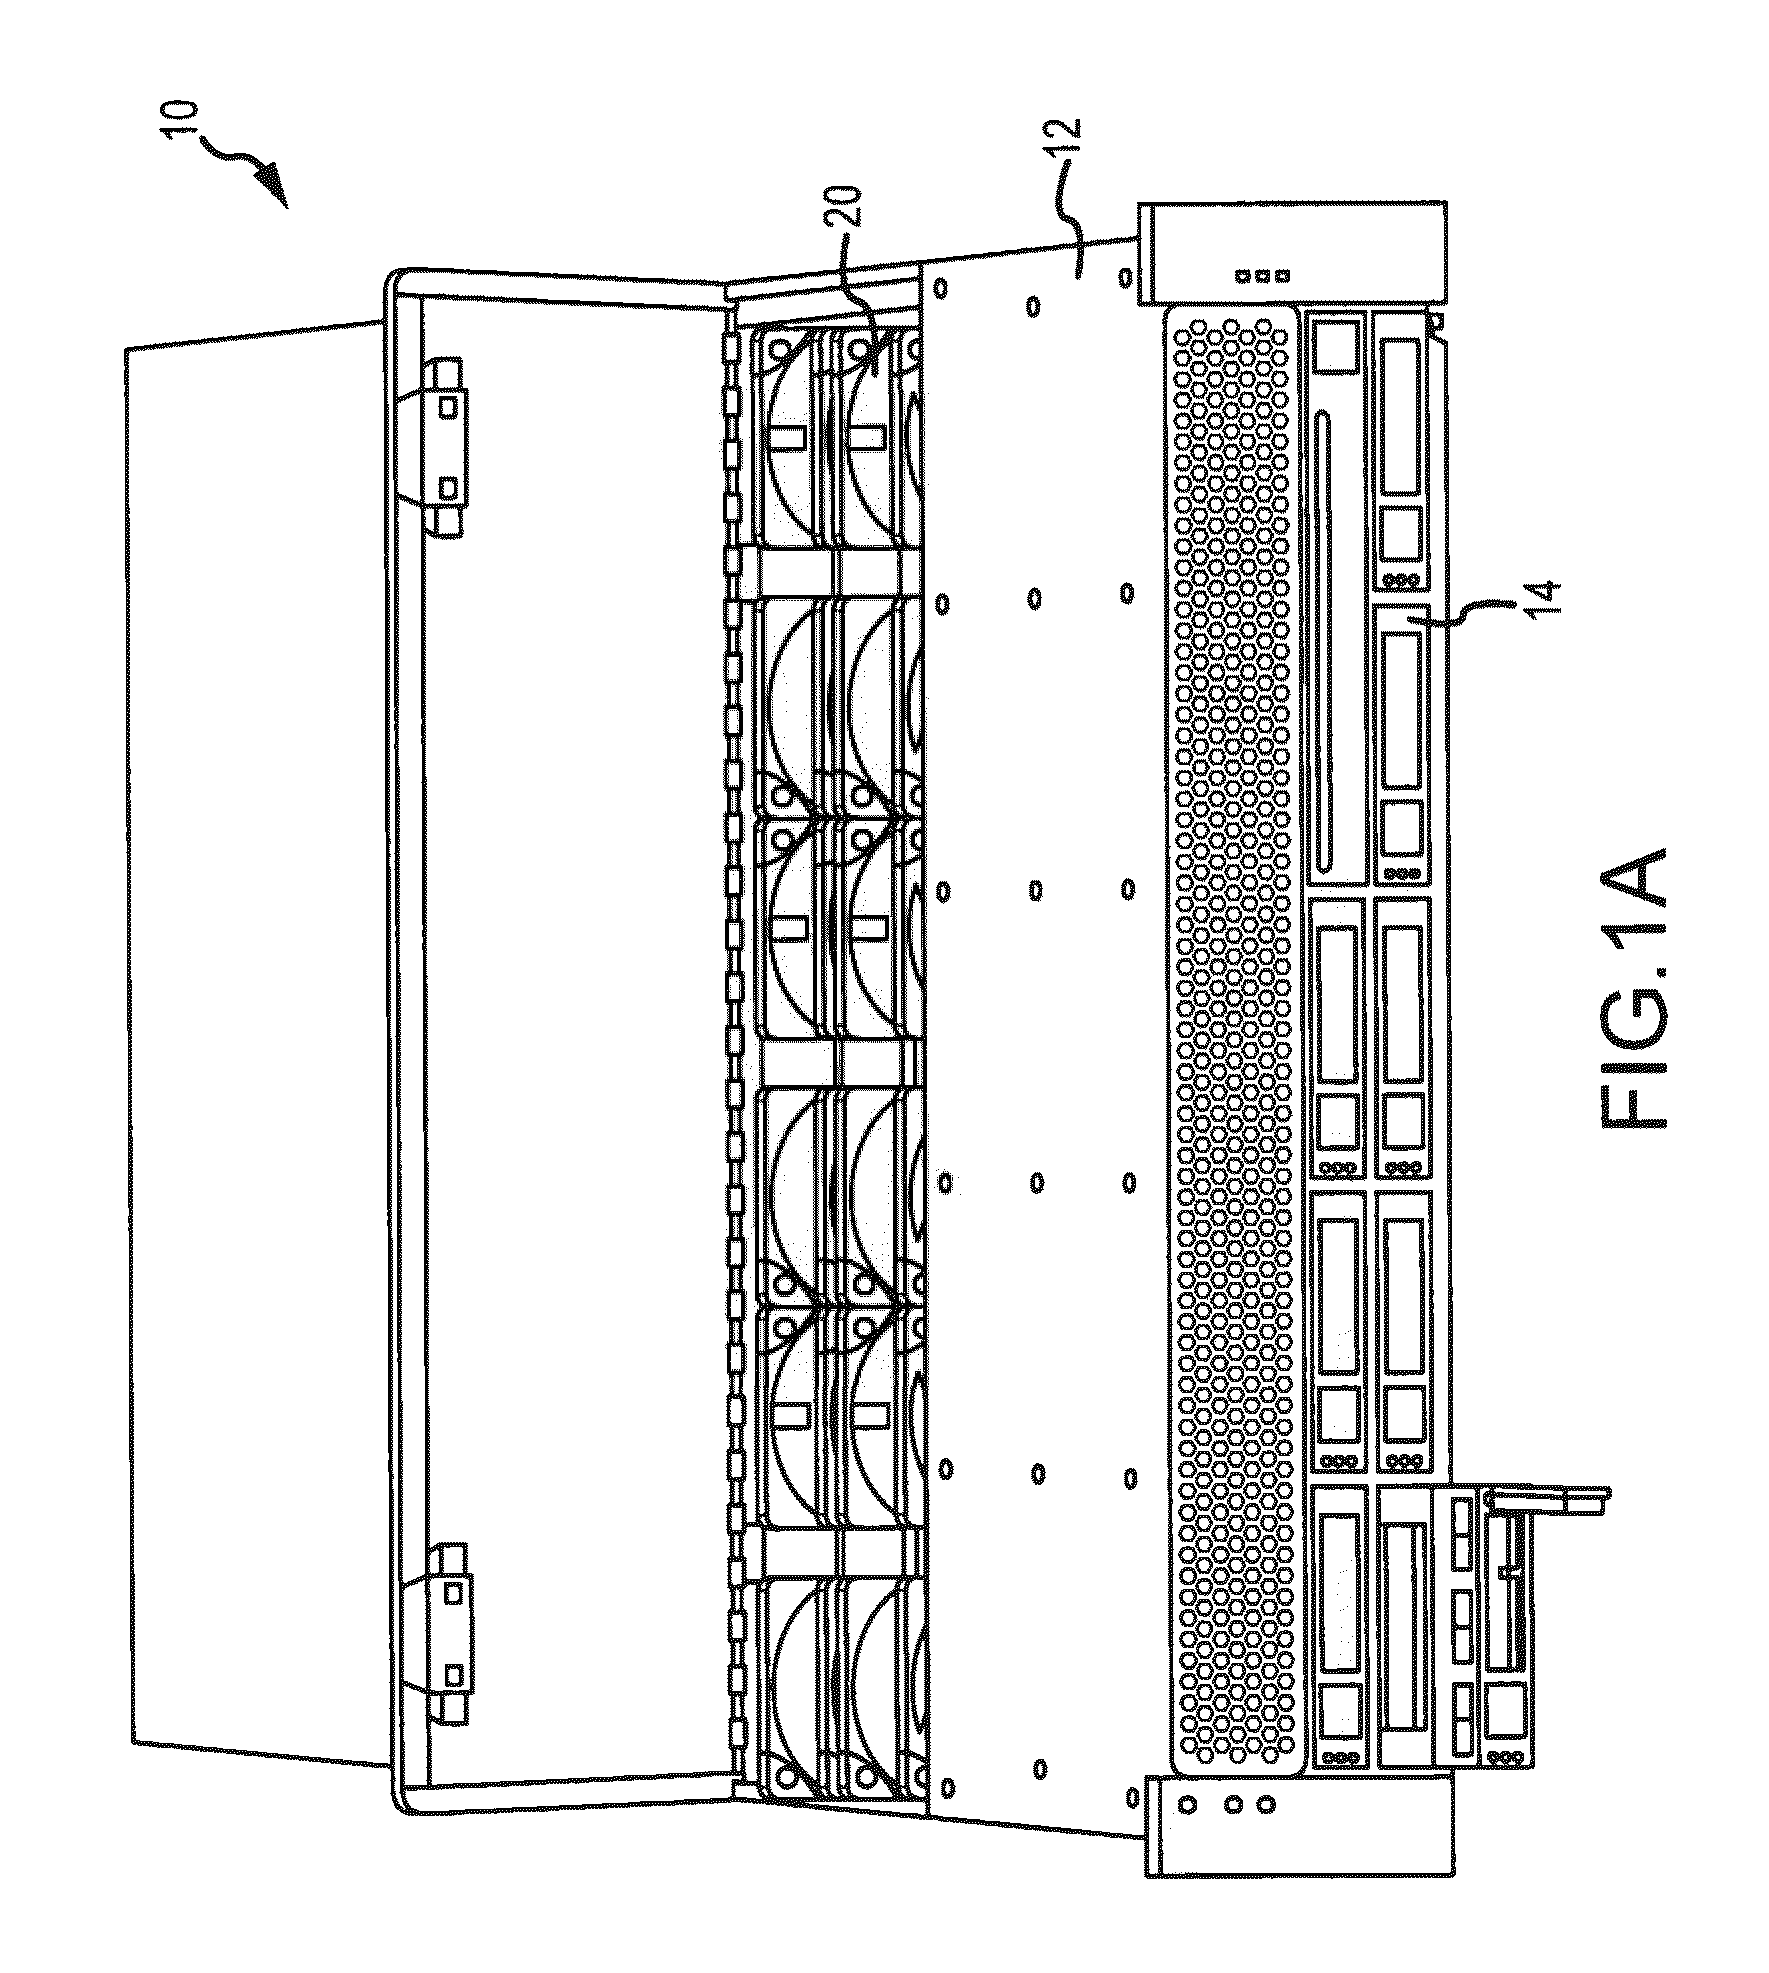 System for minimizing mechanical and acoustical fan noise coupling